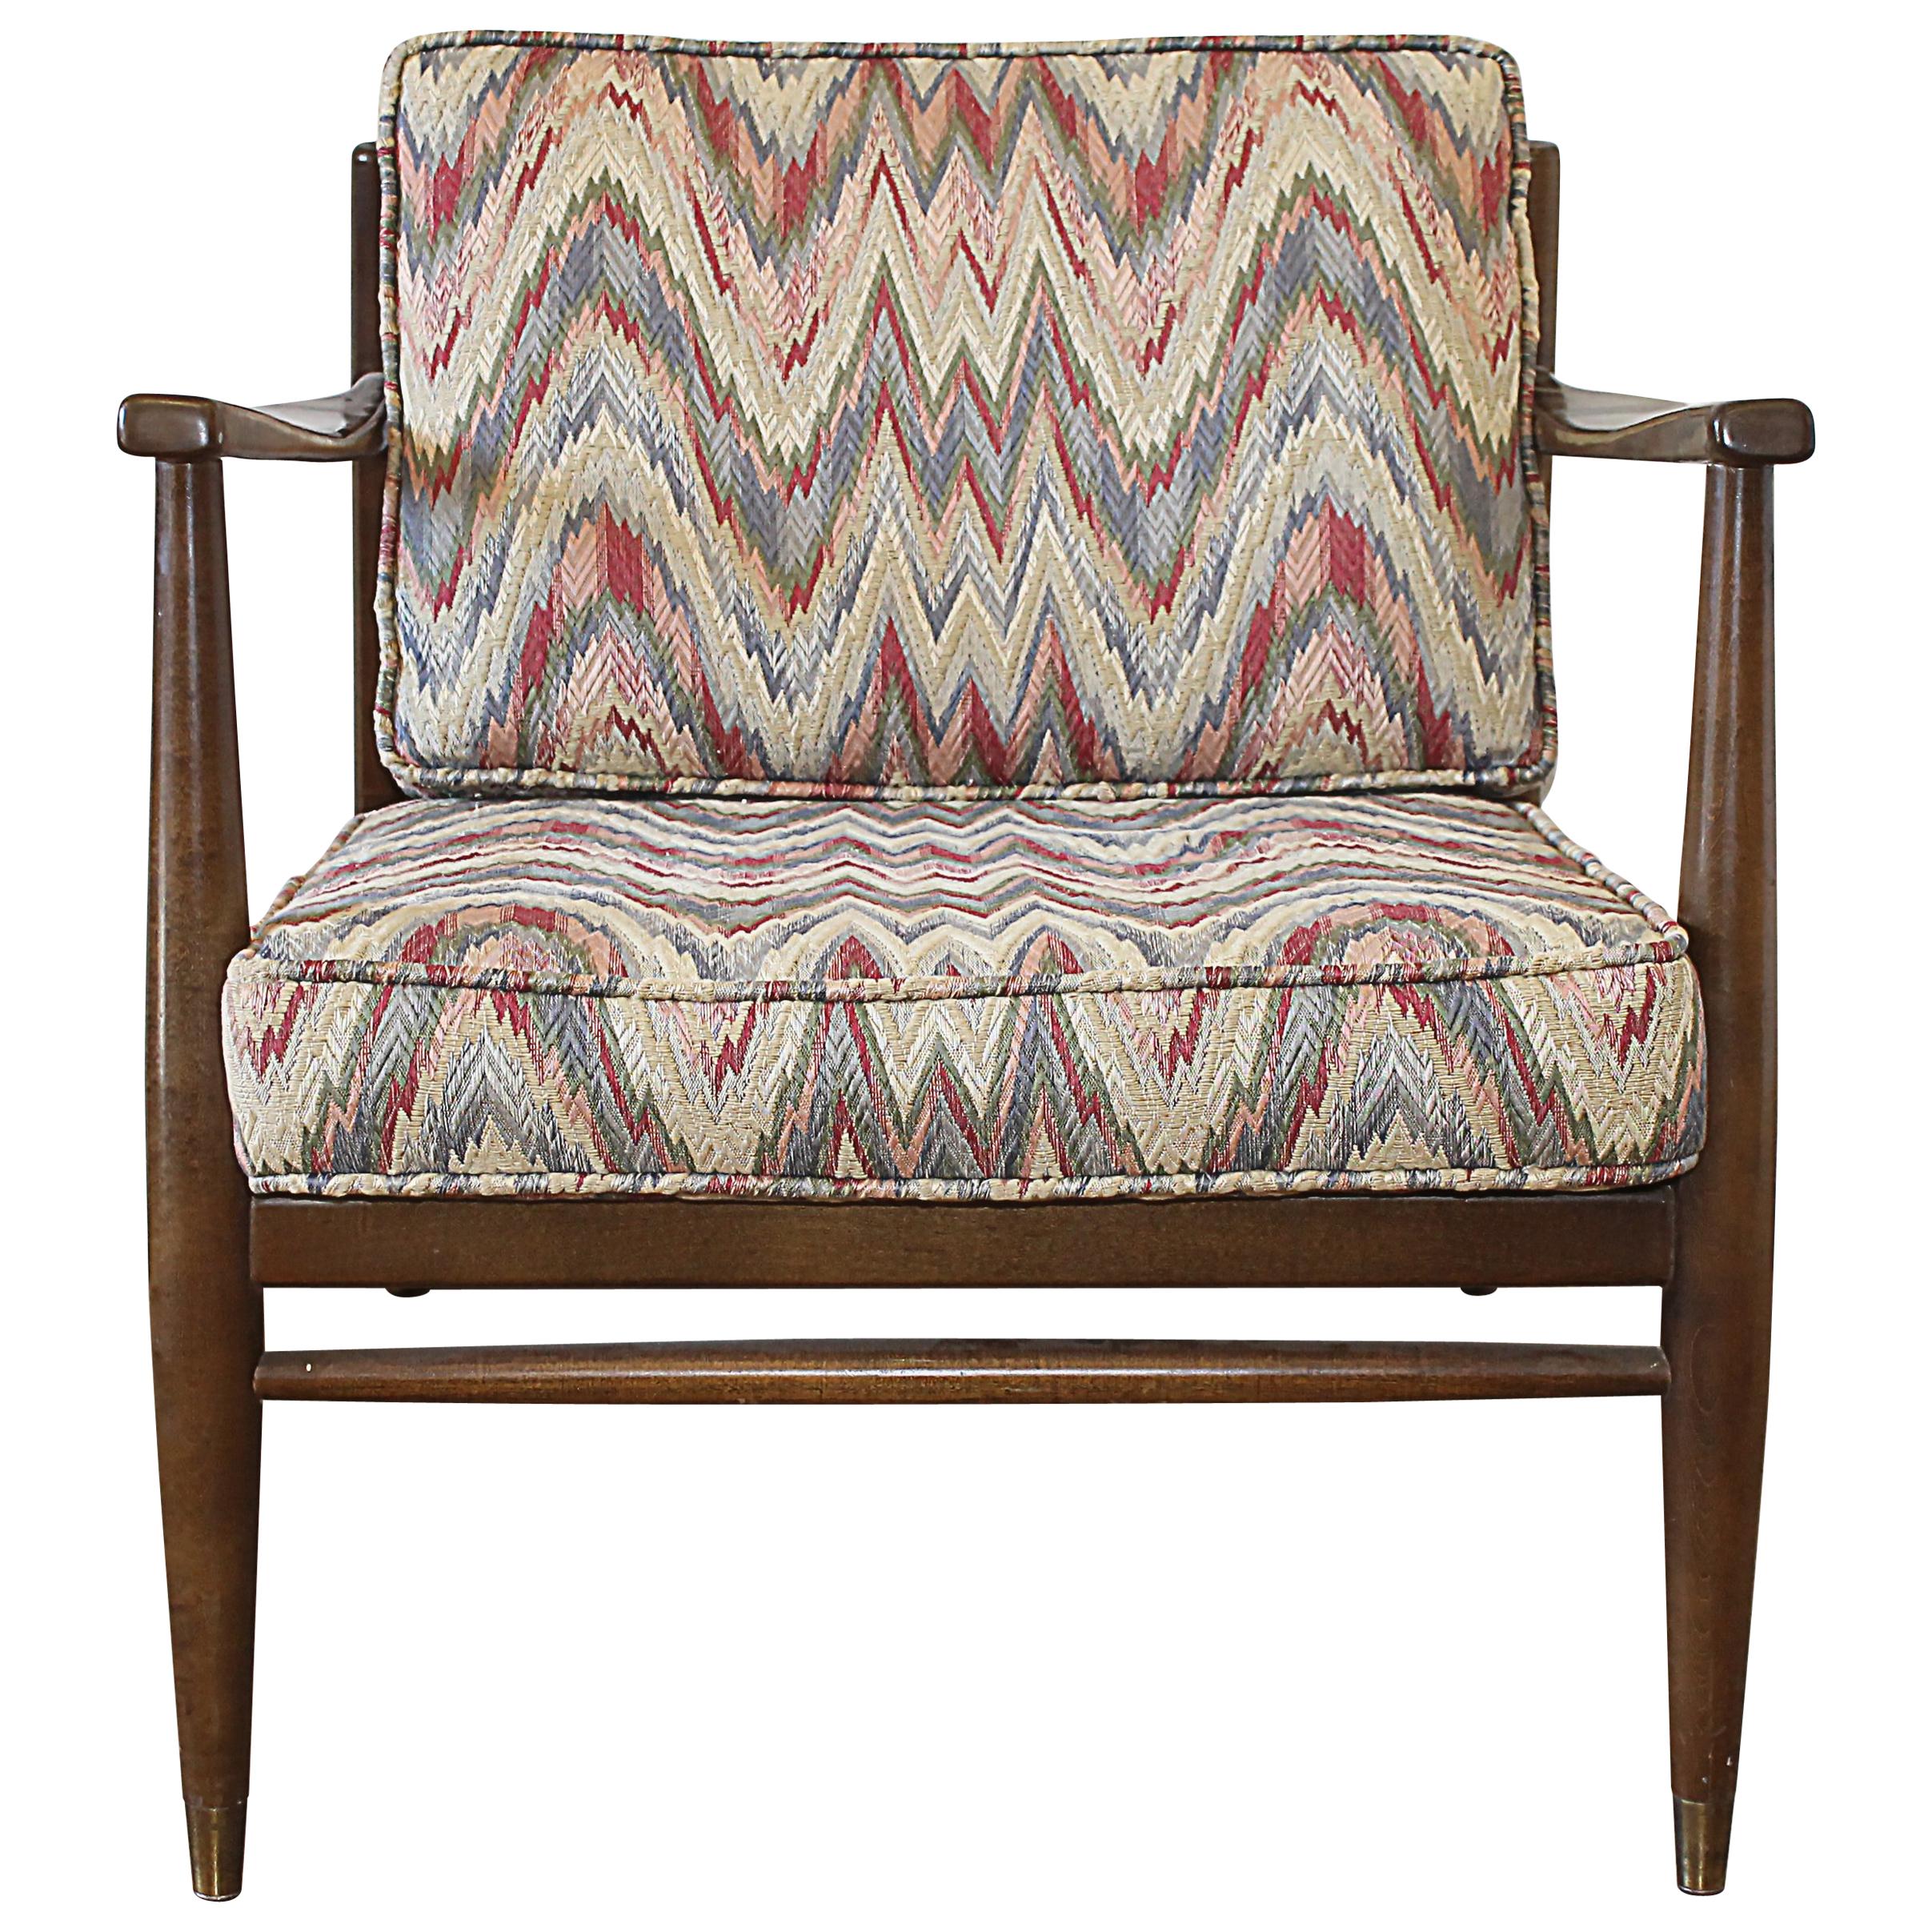 Danish Modern Chair with Flame Stitch Upholstered Cushions For Sale